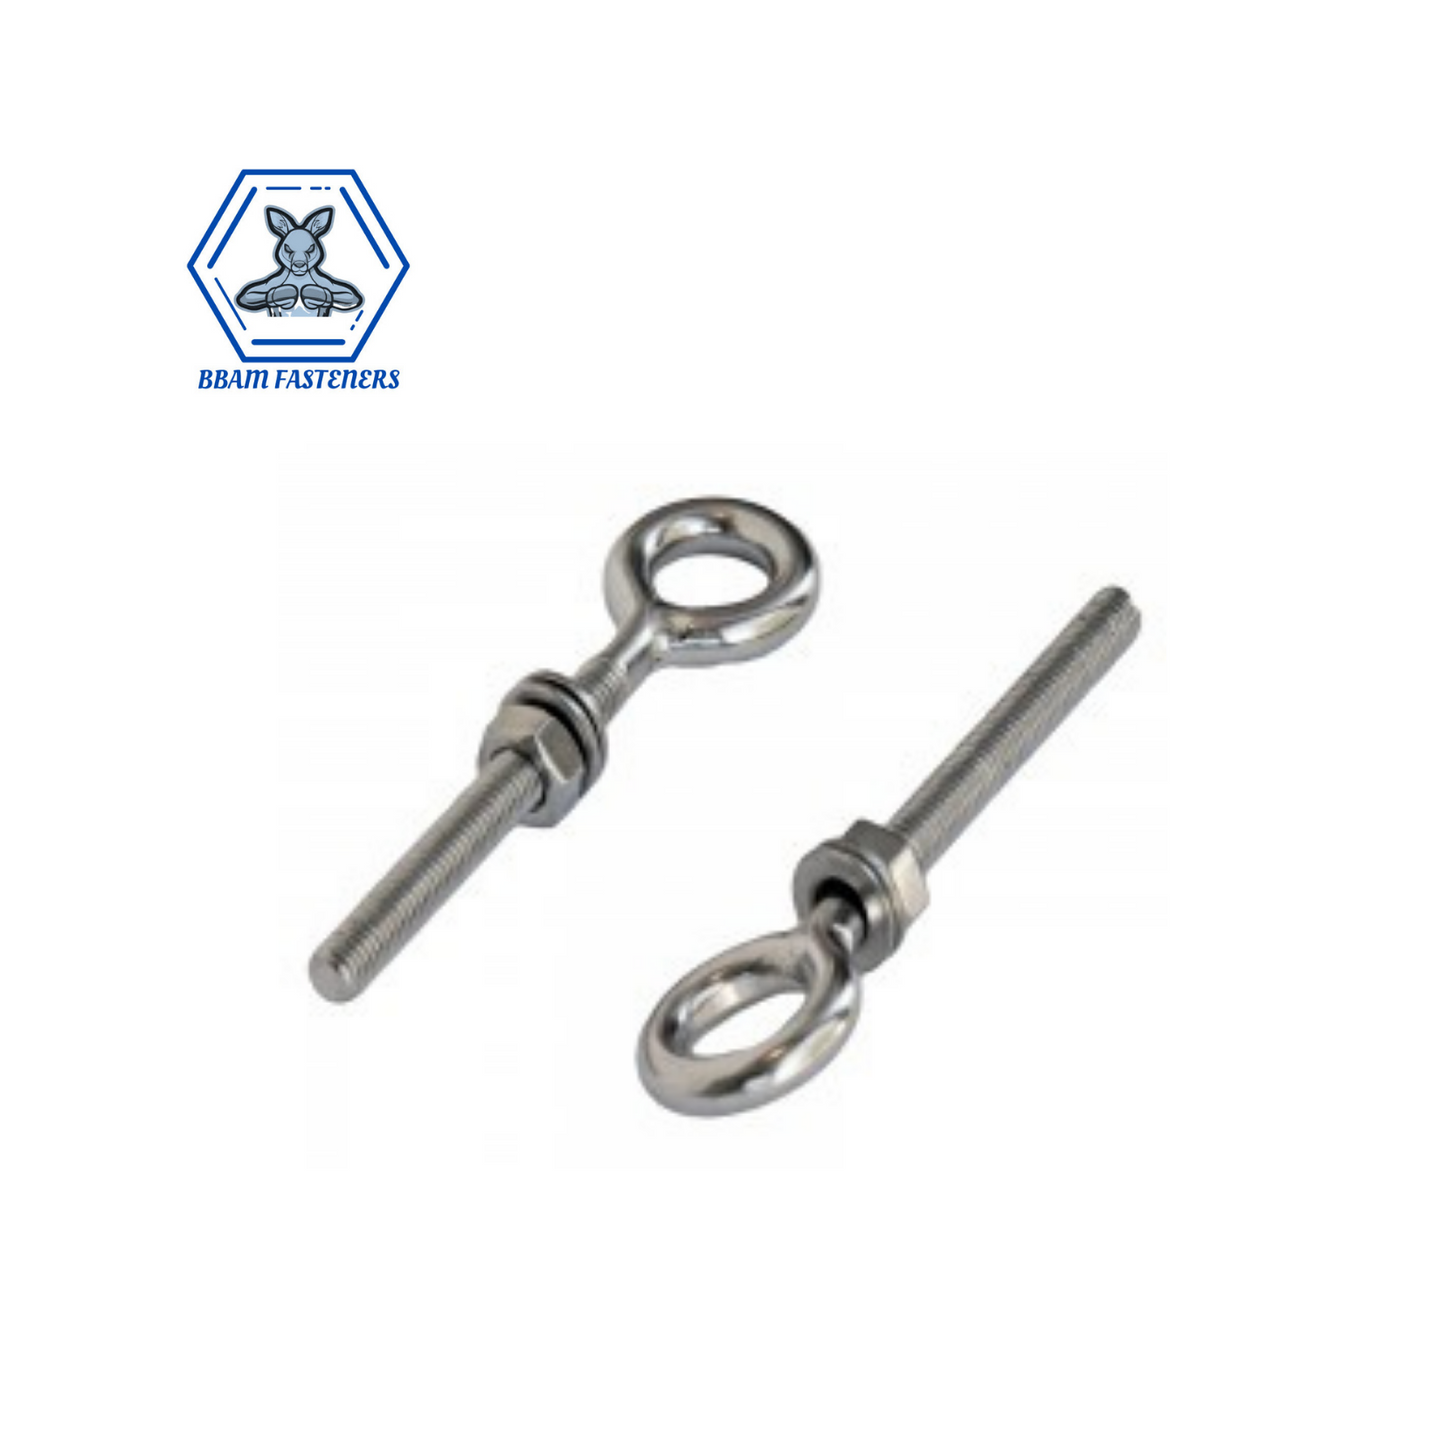 M12 x 150mm Eyebolt with Nut & Washer Stainless Steel